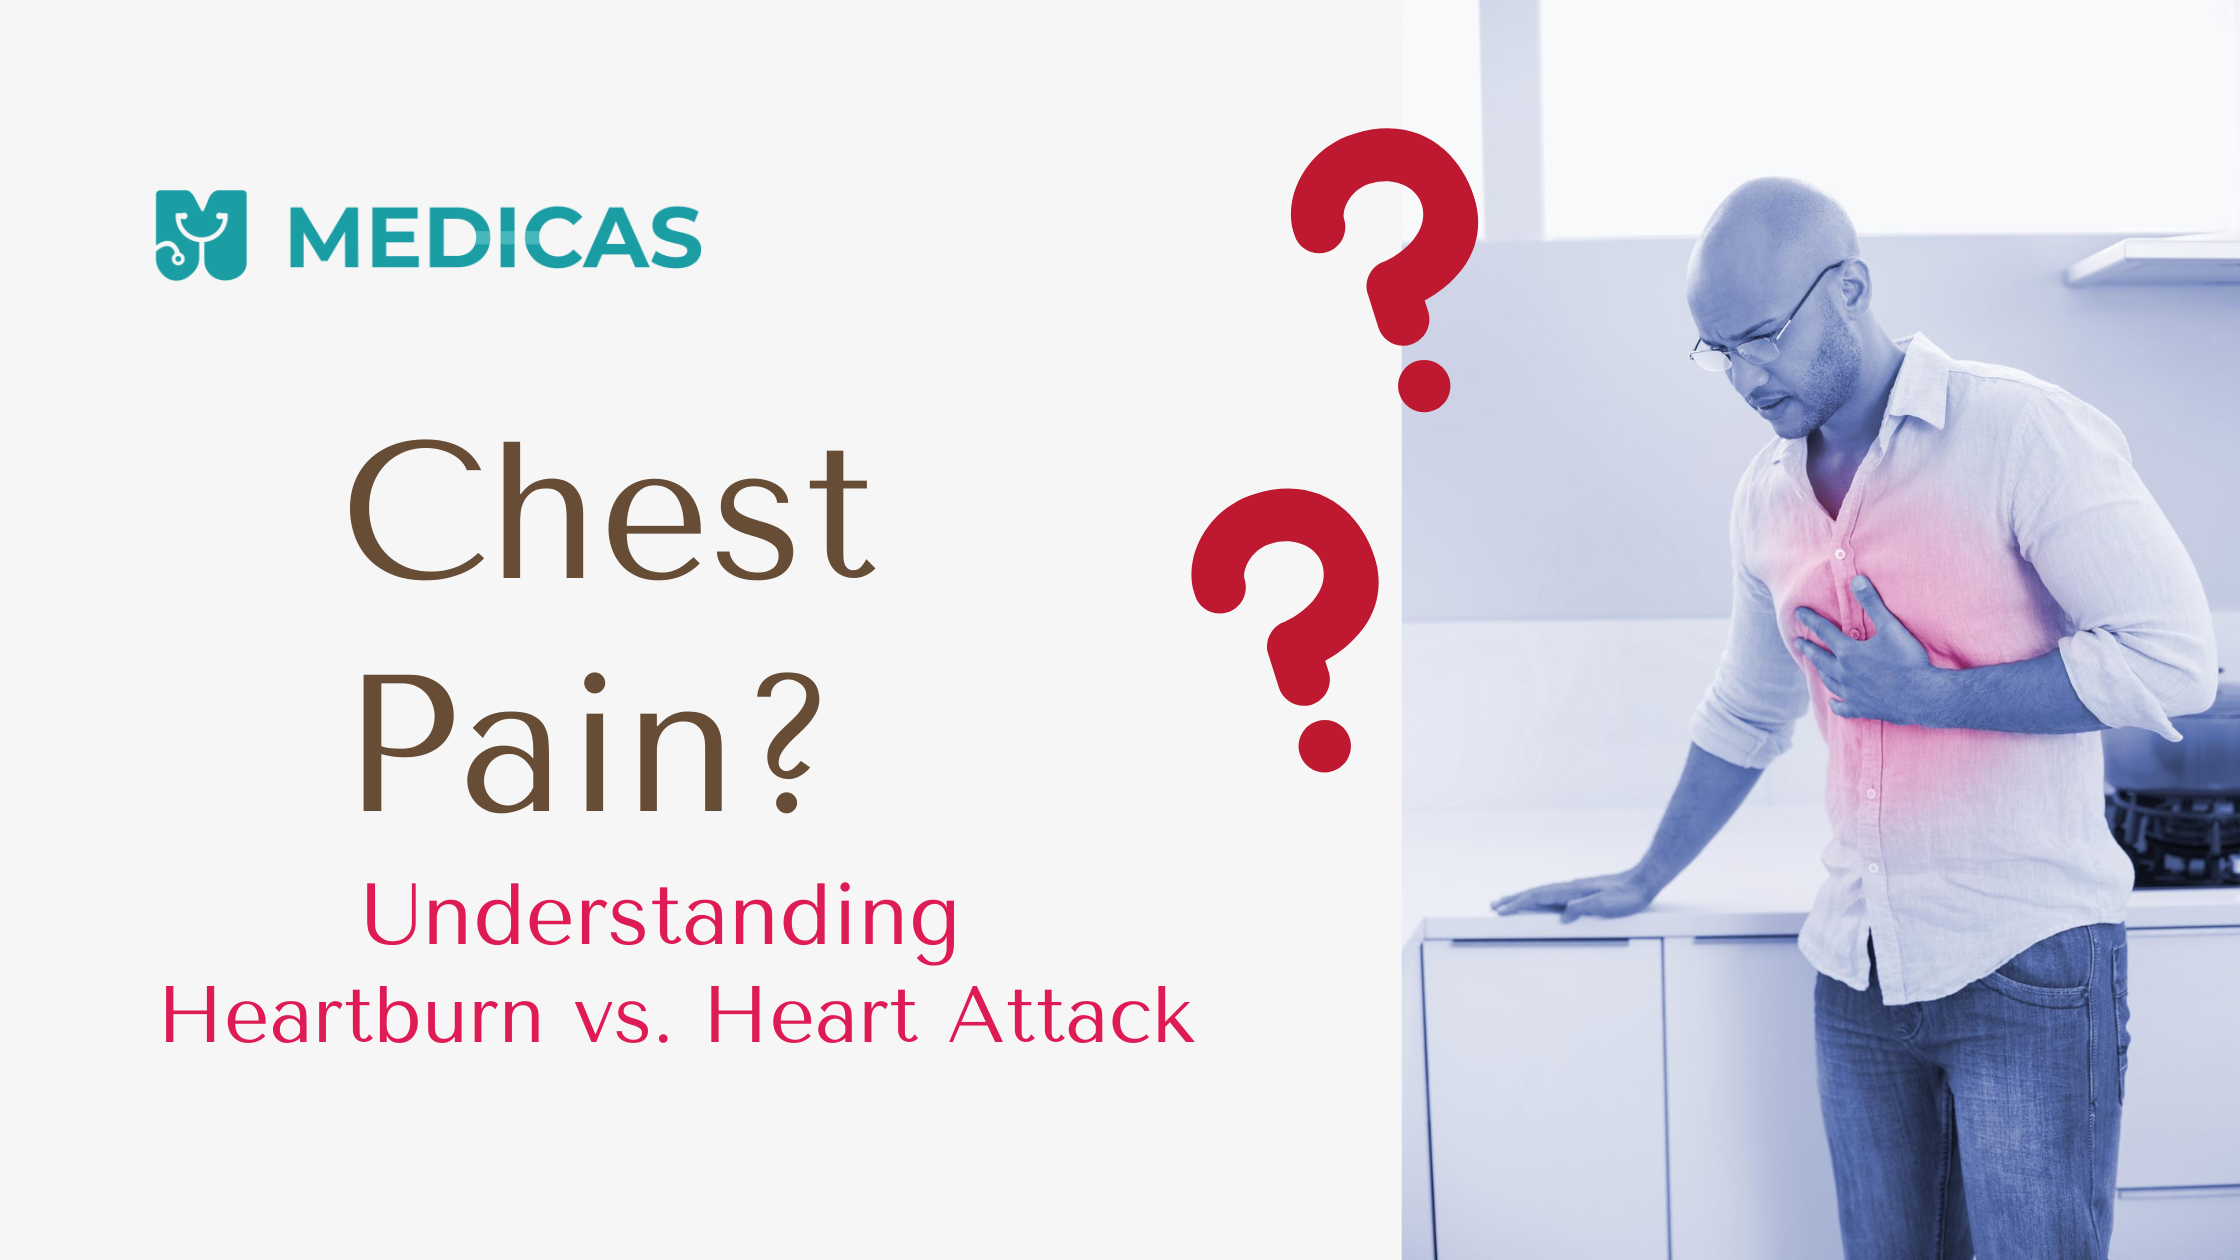 What is the Difference between Heartburn and Heart Attack?